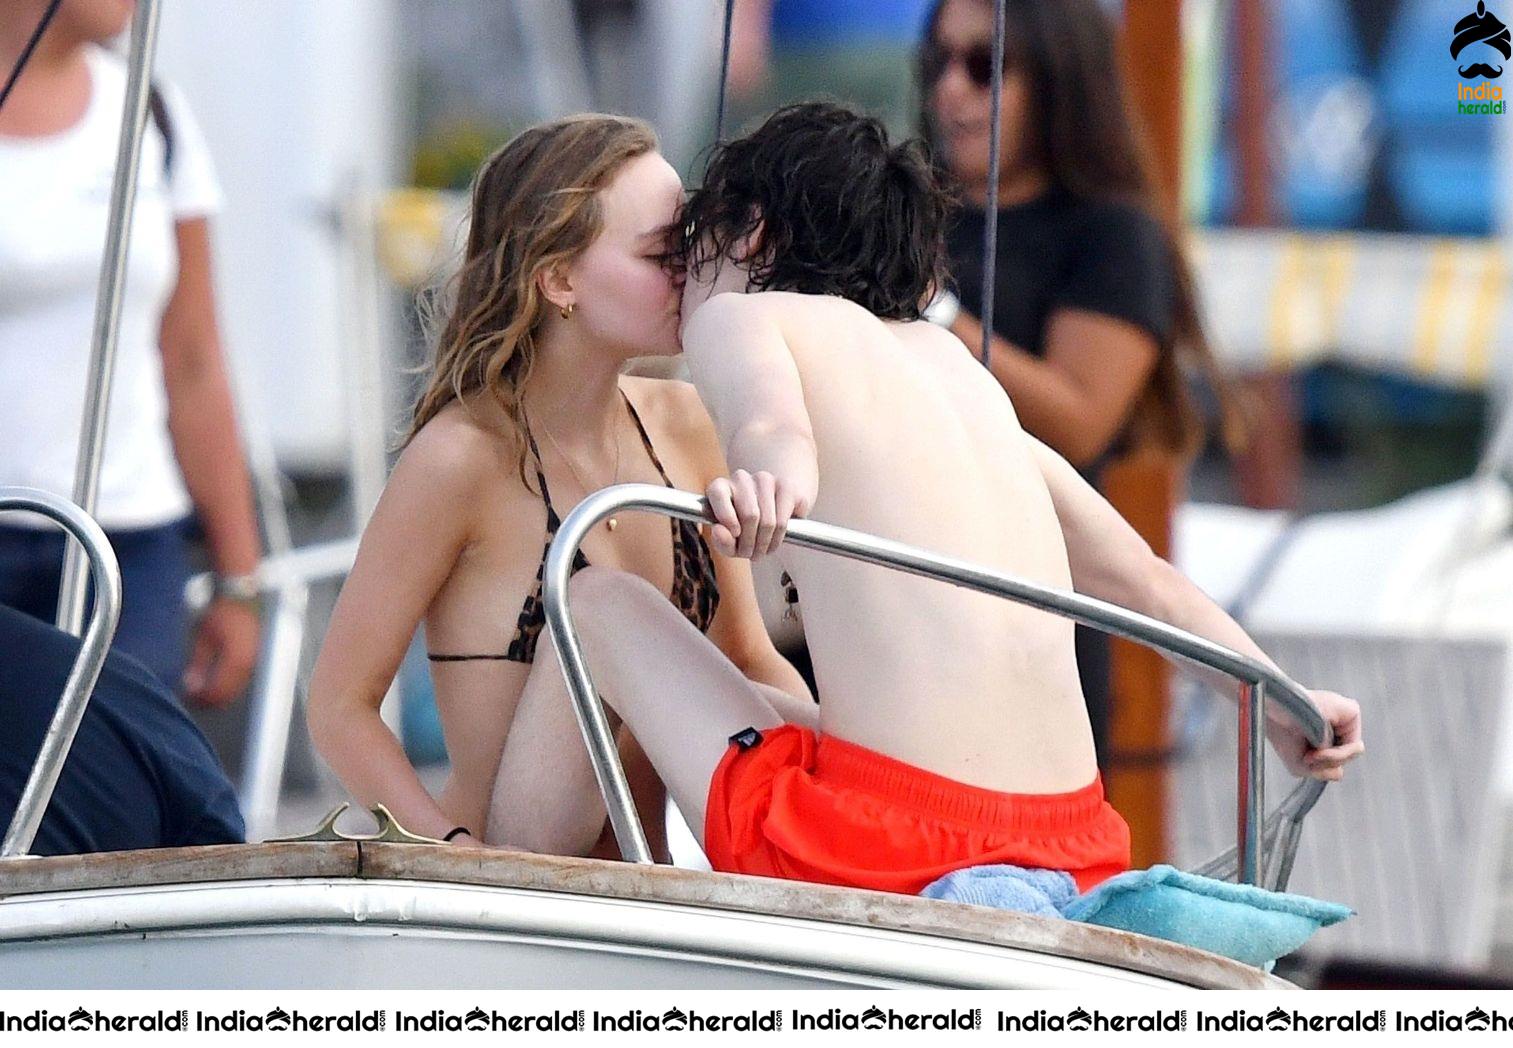 Johnny Depp Daughter Lily Rose Depp Caught in Bikini With her Boyfriend in a Boat Set 2